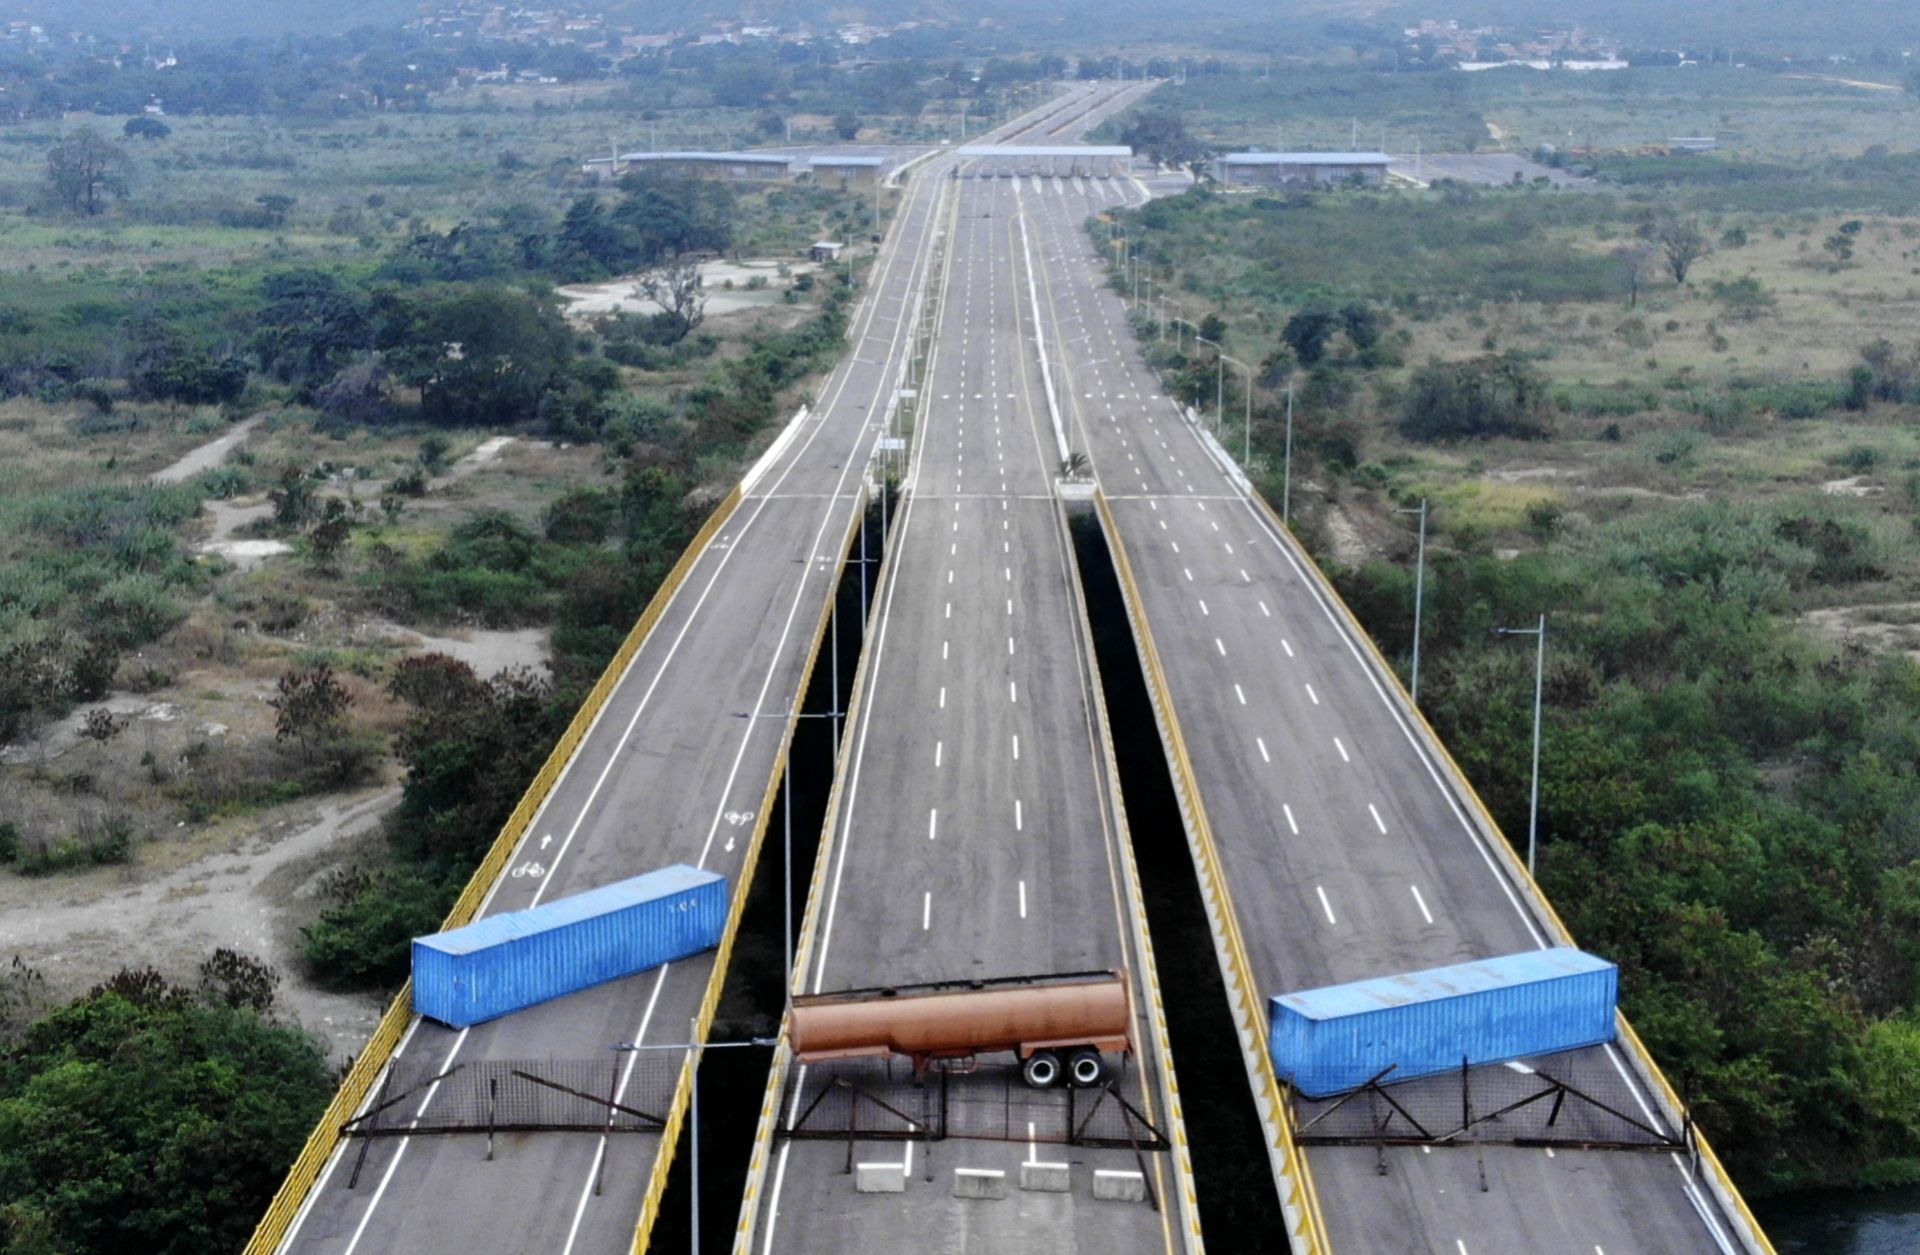 The Venezuelan military blocked the Tienditas International Bridge on the Colombian border on Feb. 5, 2019, to prevent aid supplies from entering the country.